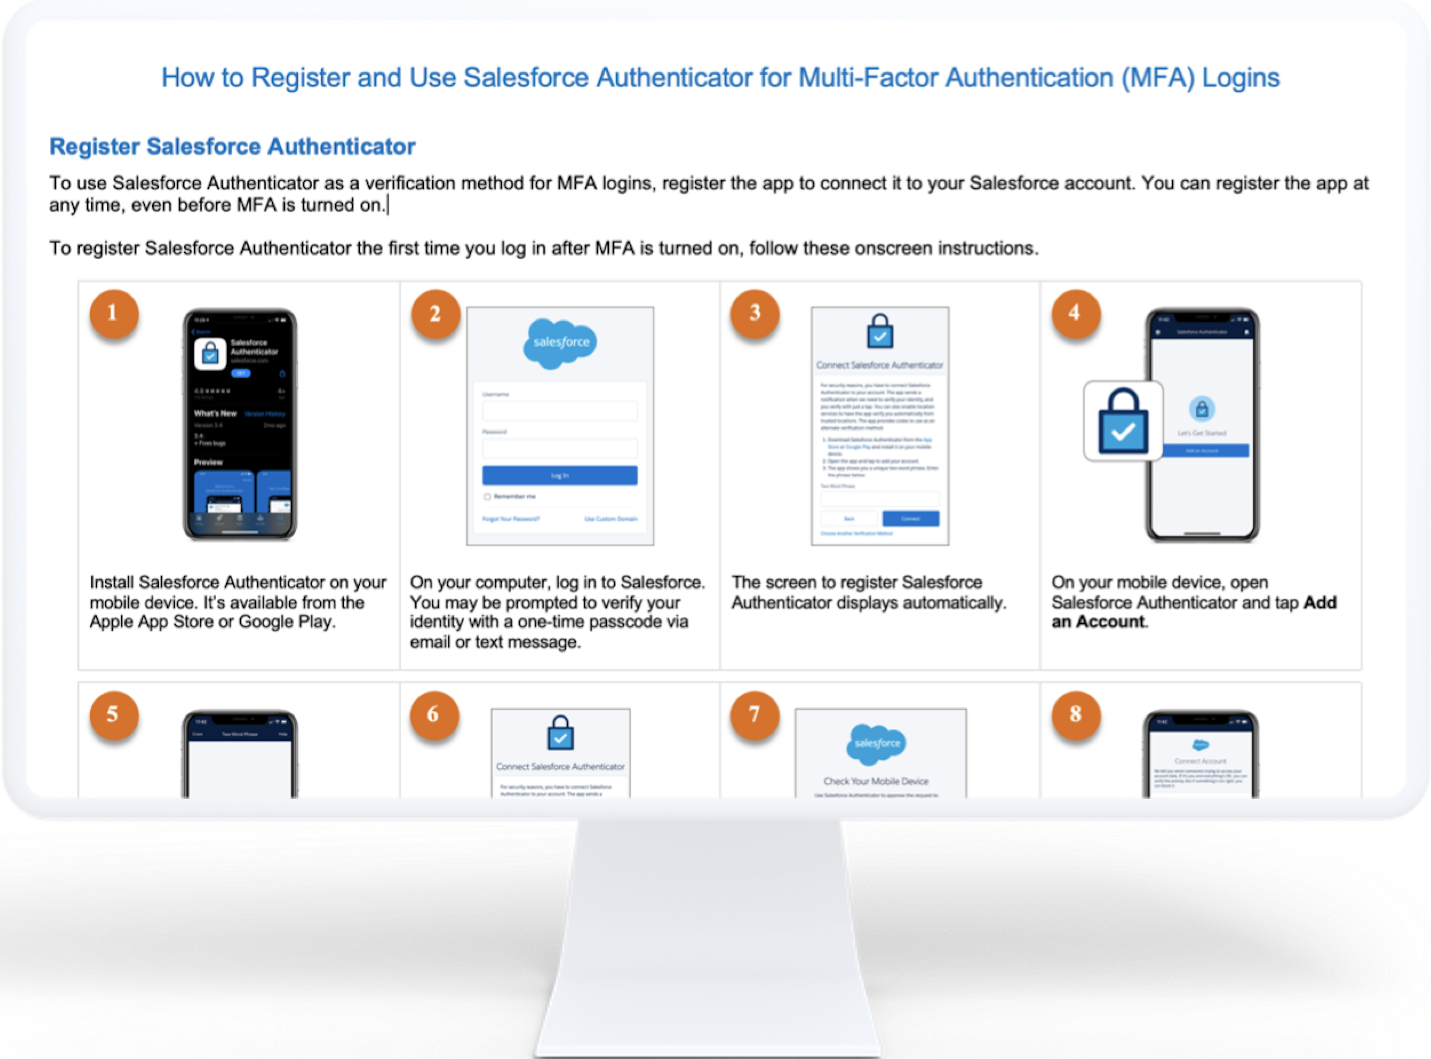 Computer monitor displaying process screenshots for "how to register and use the Salesforce Authenticator for MFA logins"